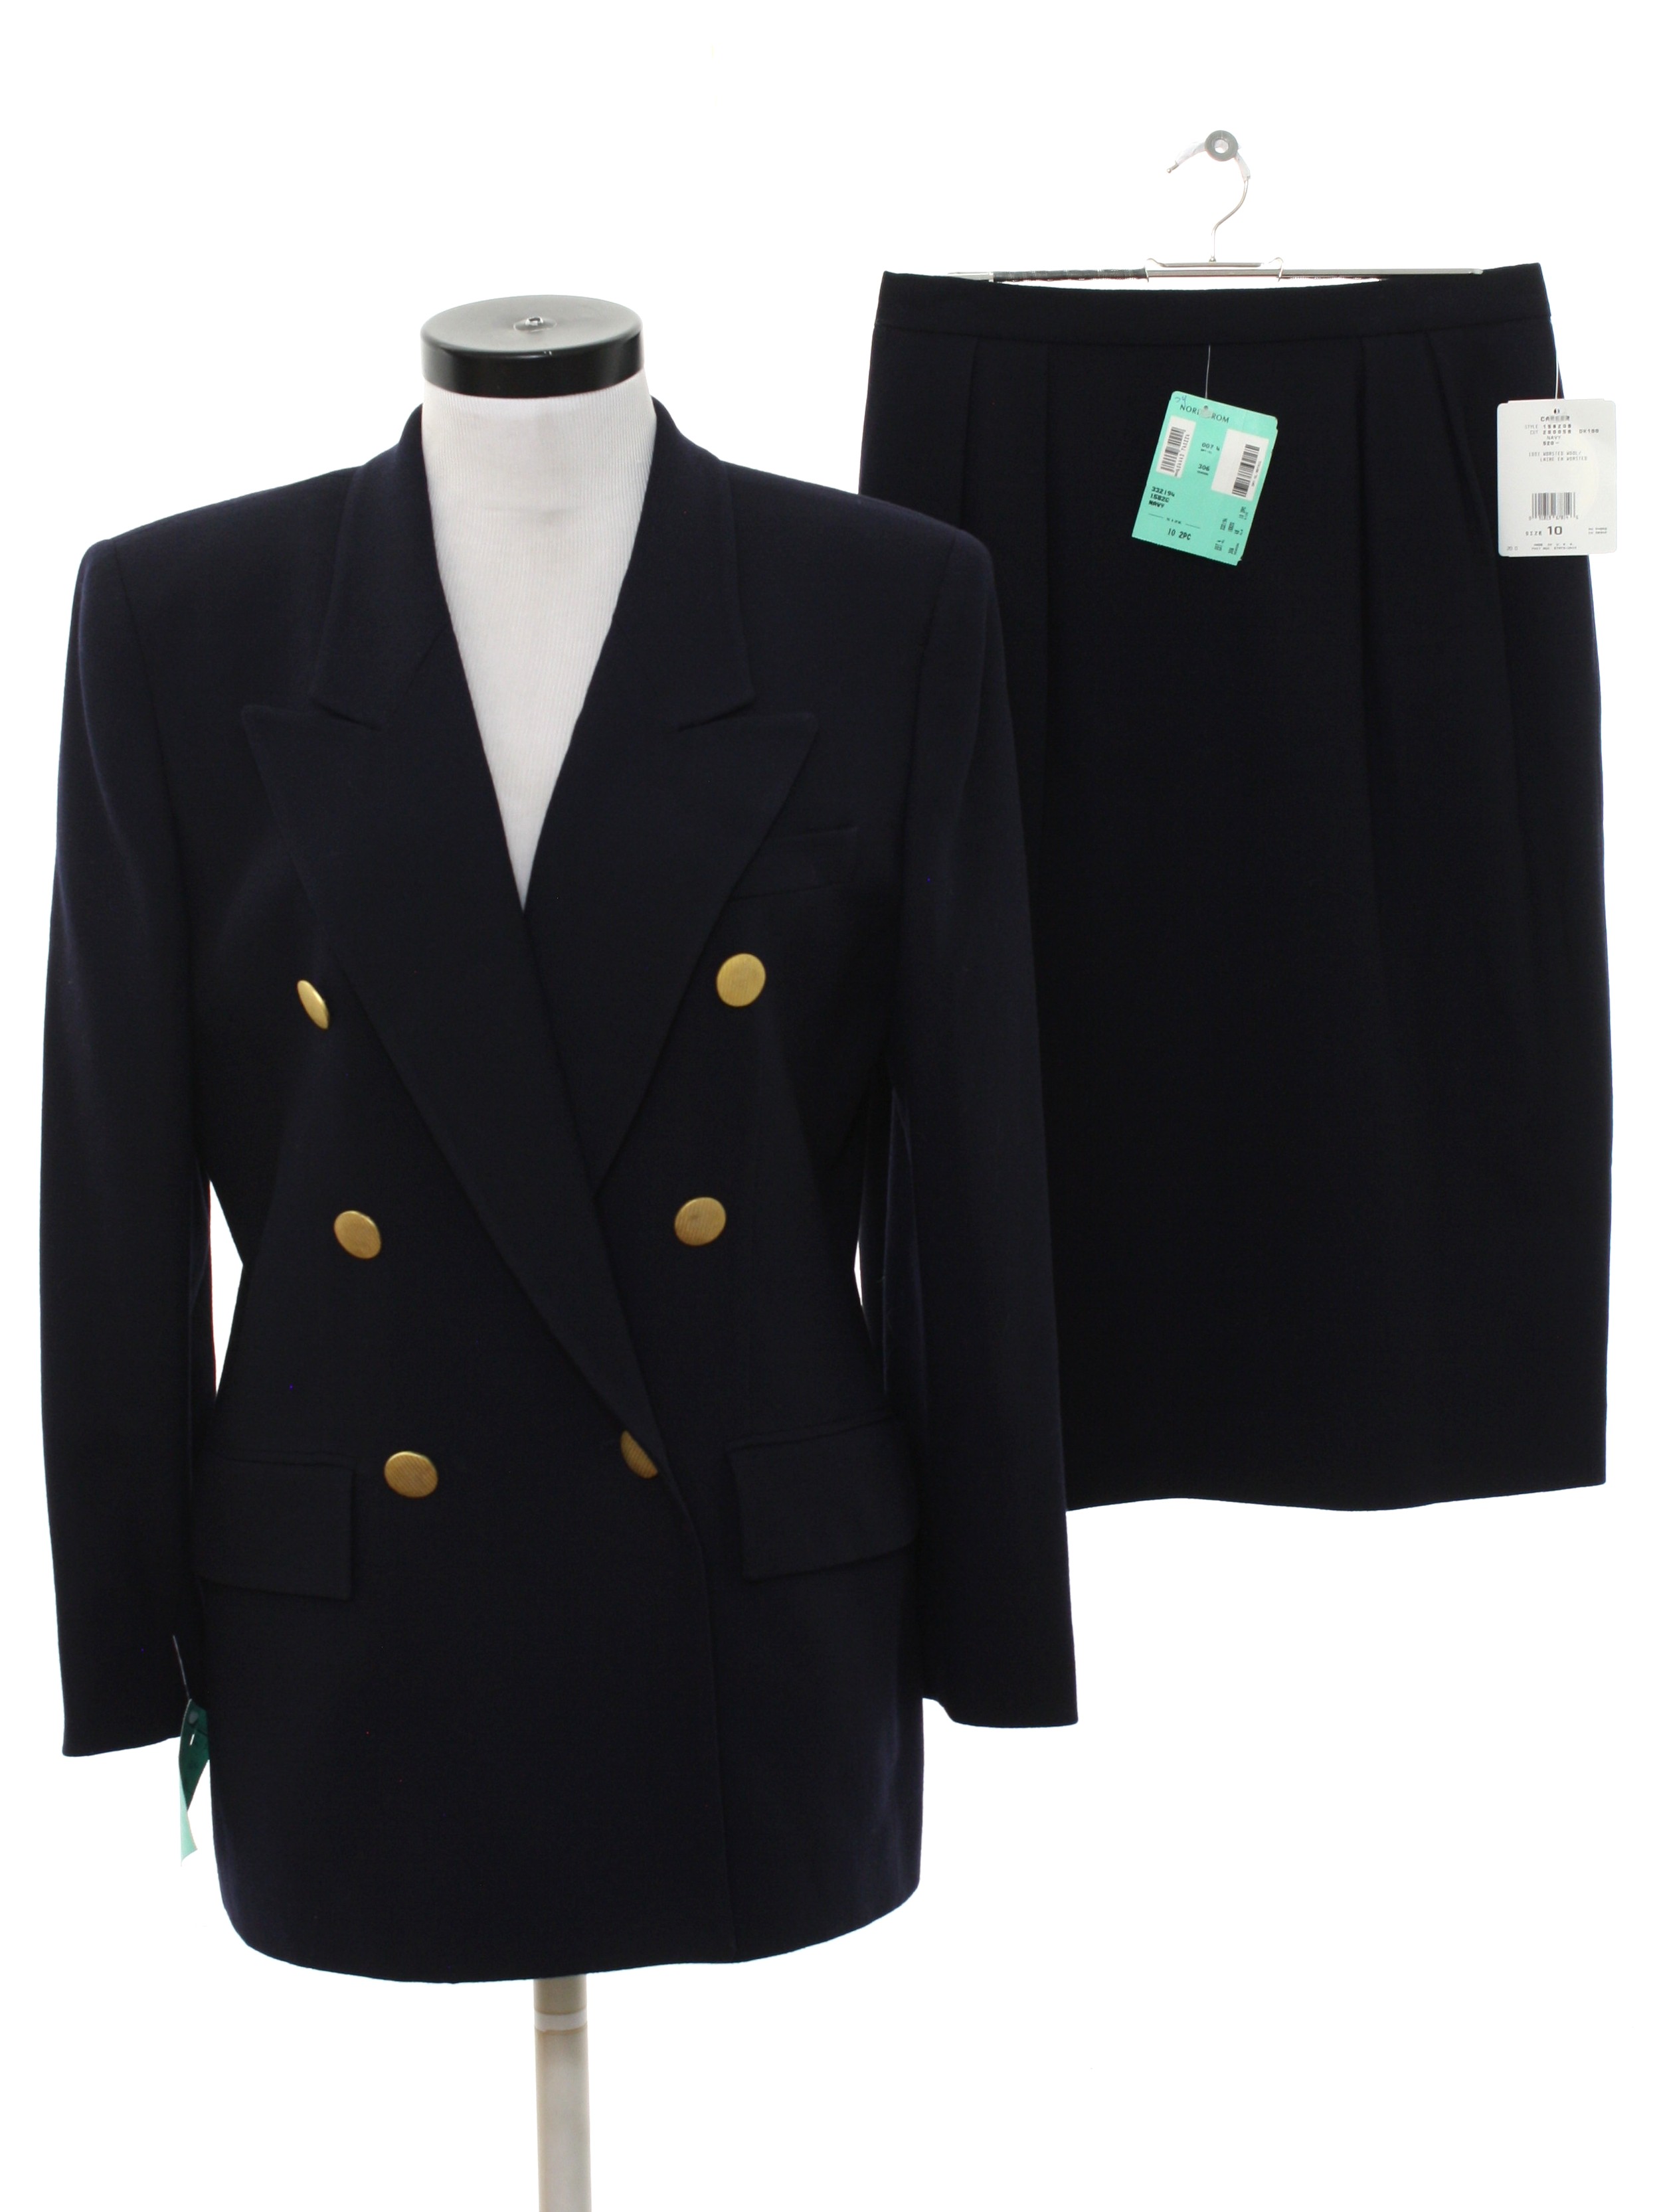 90s Retro Suit: 90s -Christian Dior- Womens navy wool suit. The mid ...